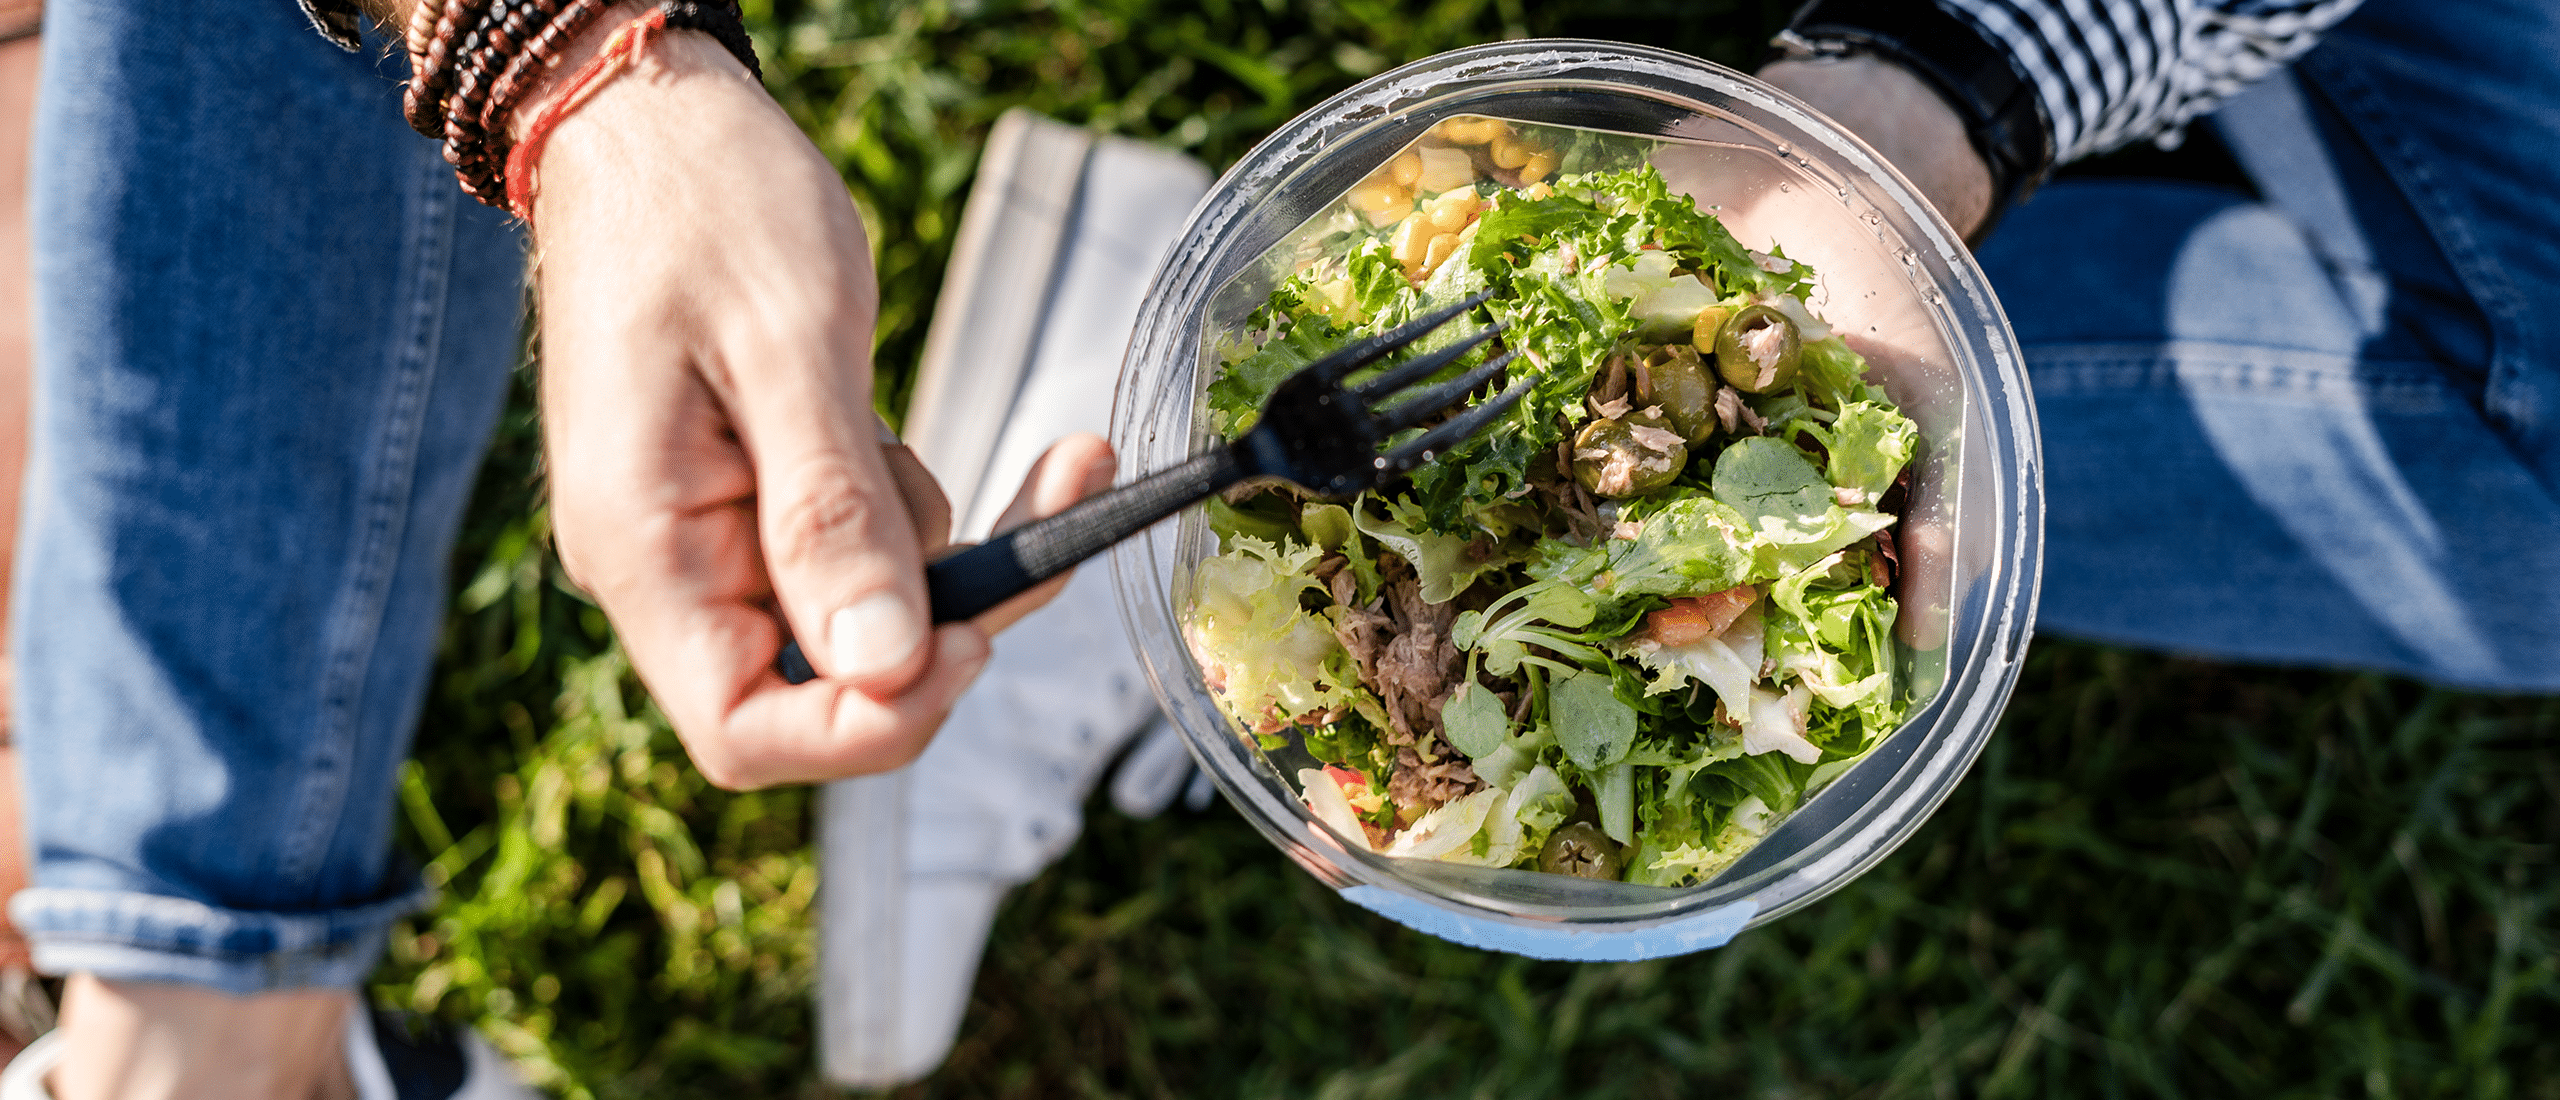 man eating a salad in the grass